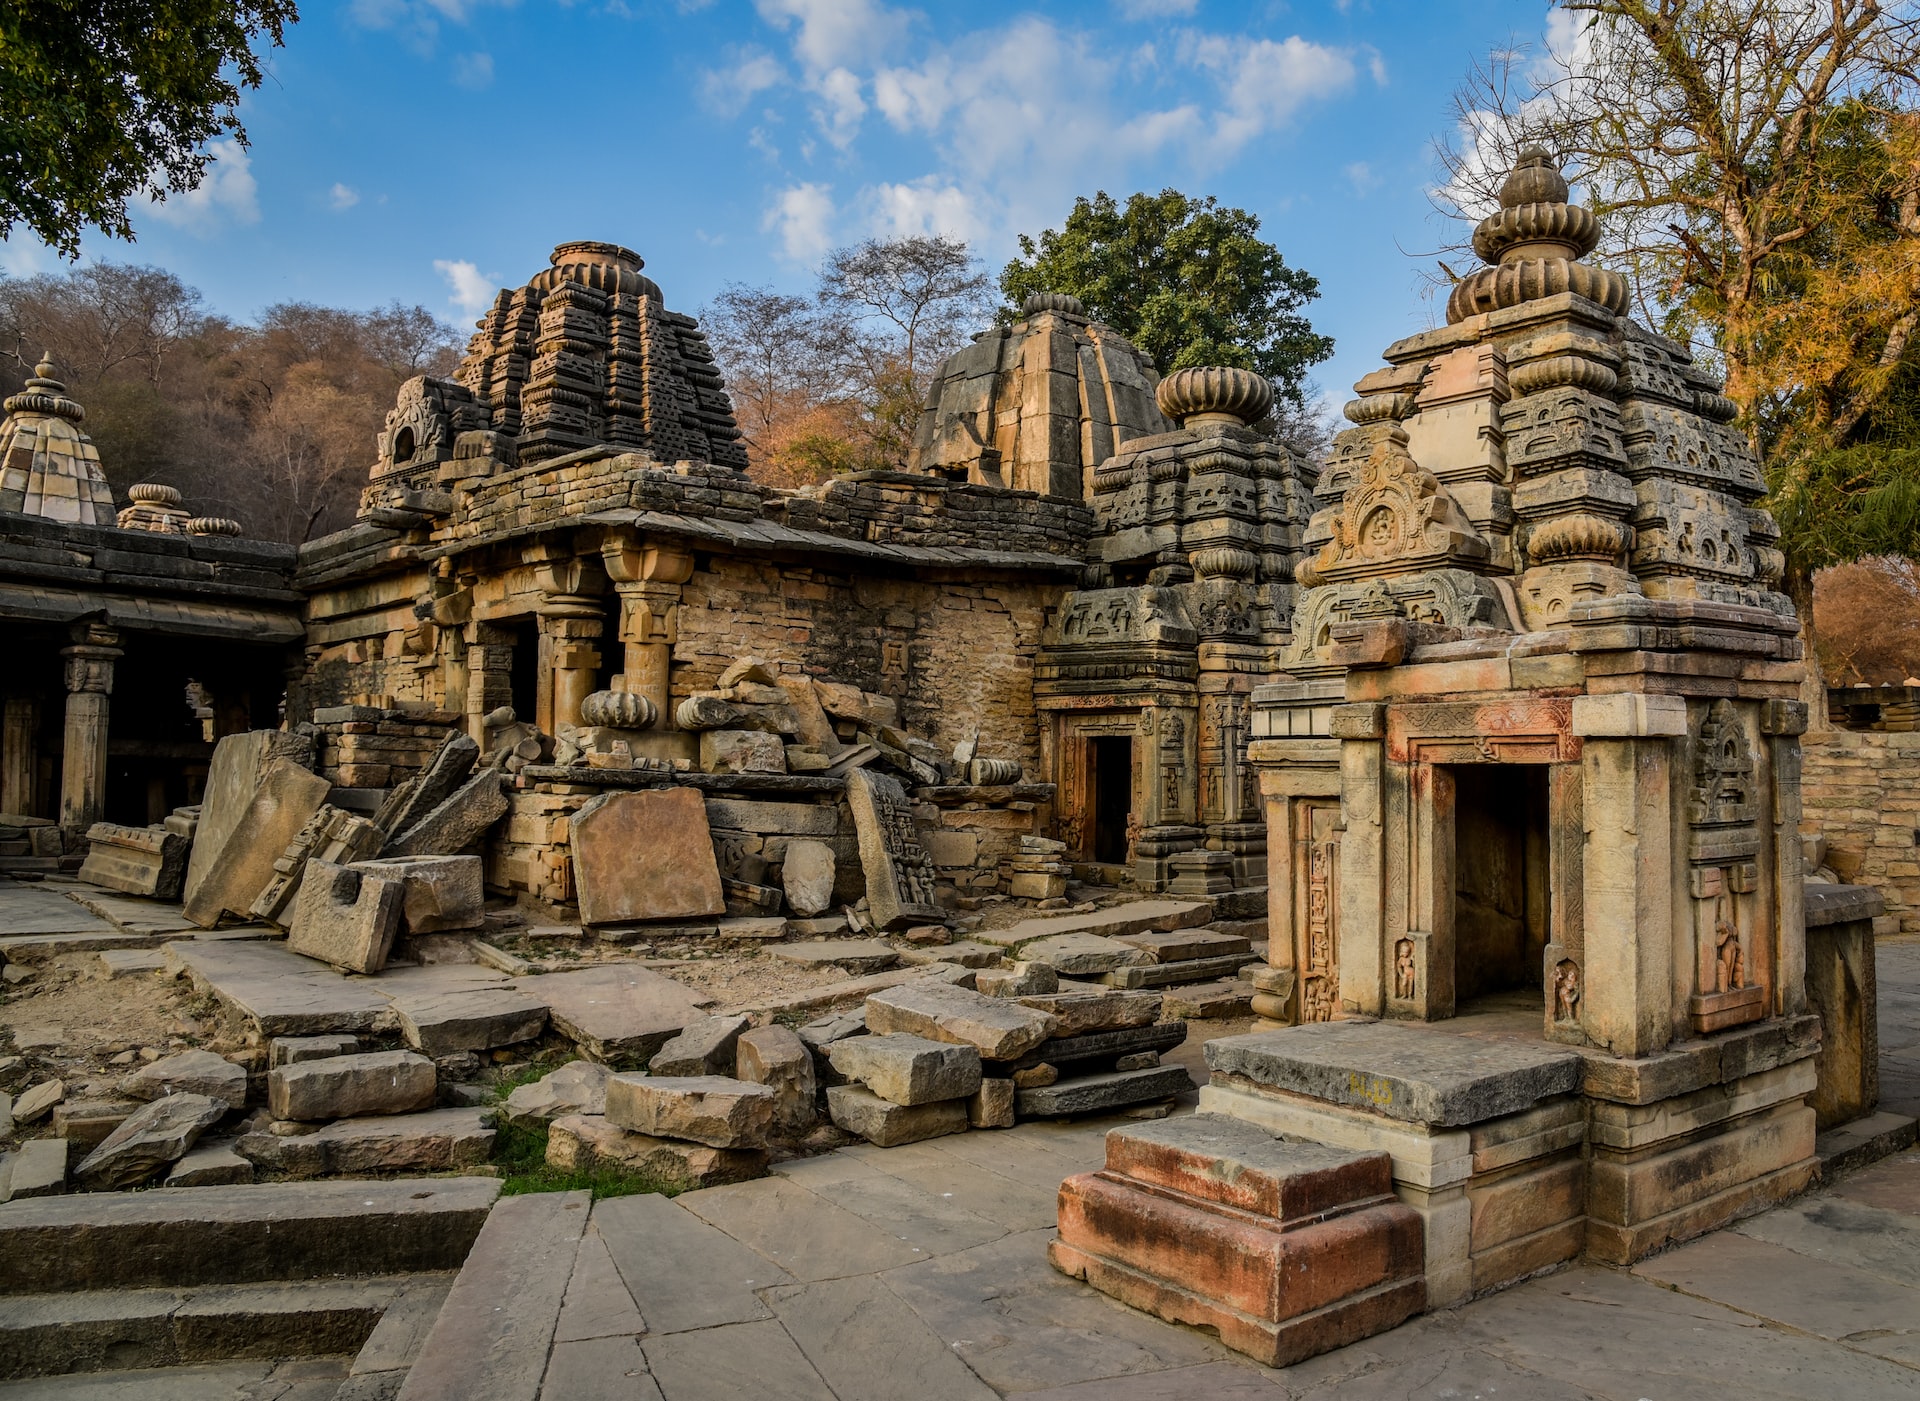 Off the Beaten Path: Unforgettable Locations in India That You’ve Never Heard Of